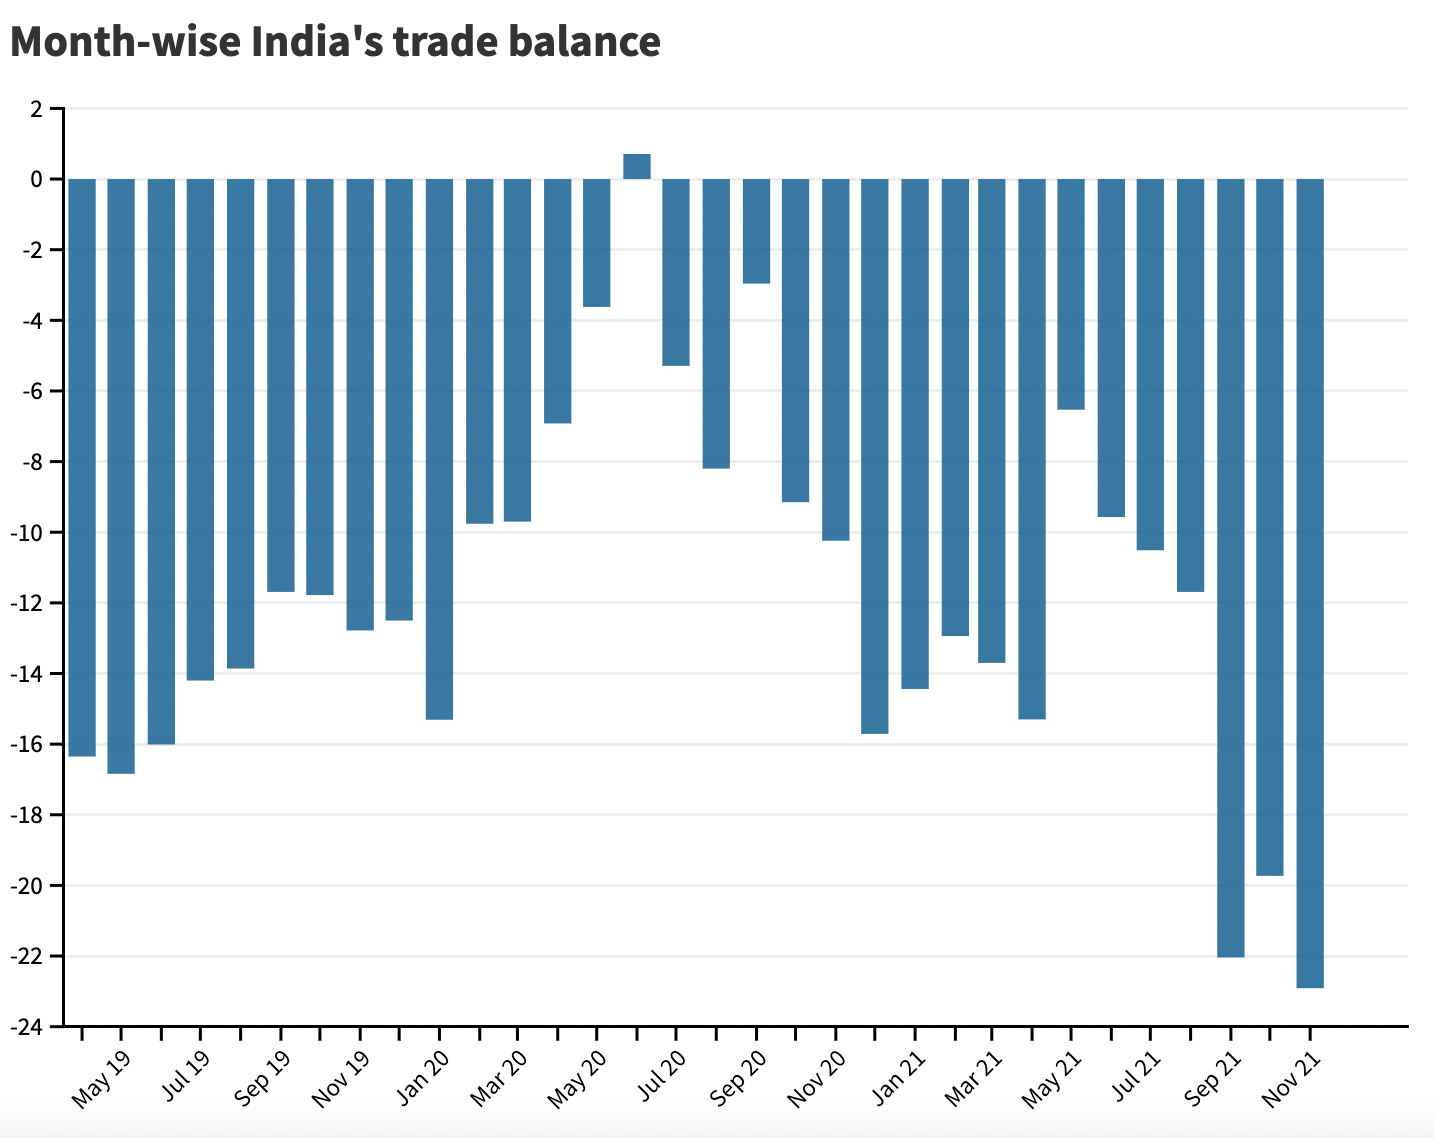 India's monthly trade balance